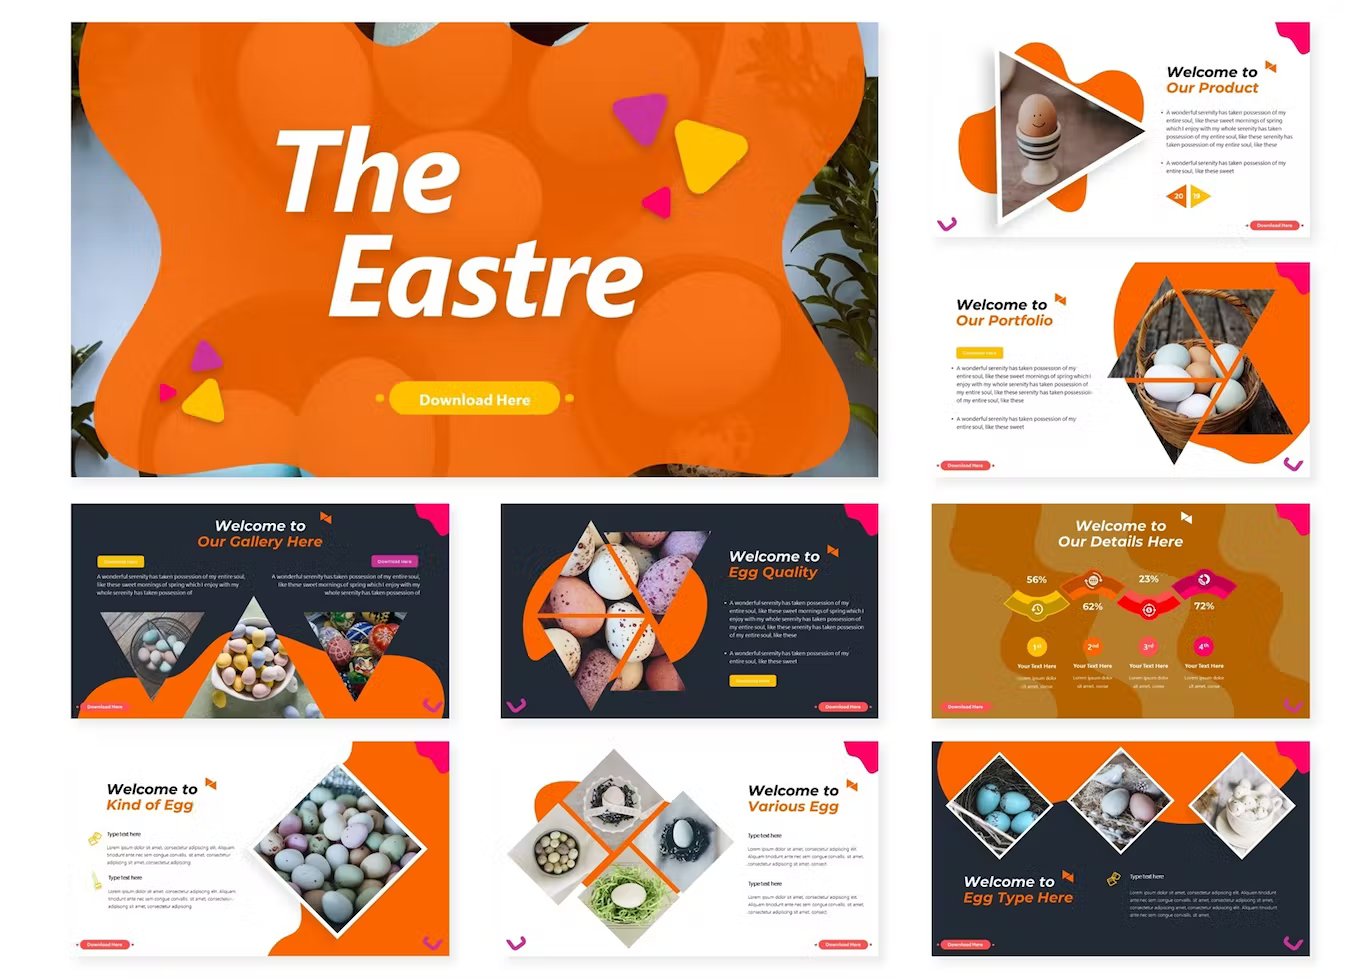 A set of 9 different the easter google slides templates in orange, white, dark gray, yellow and pink on a white background.